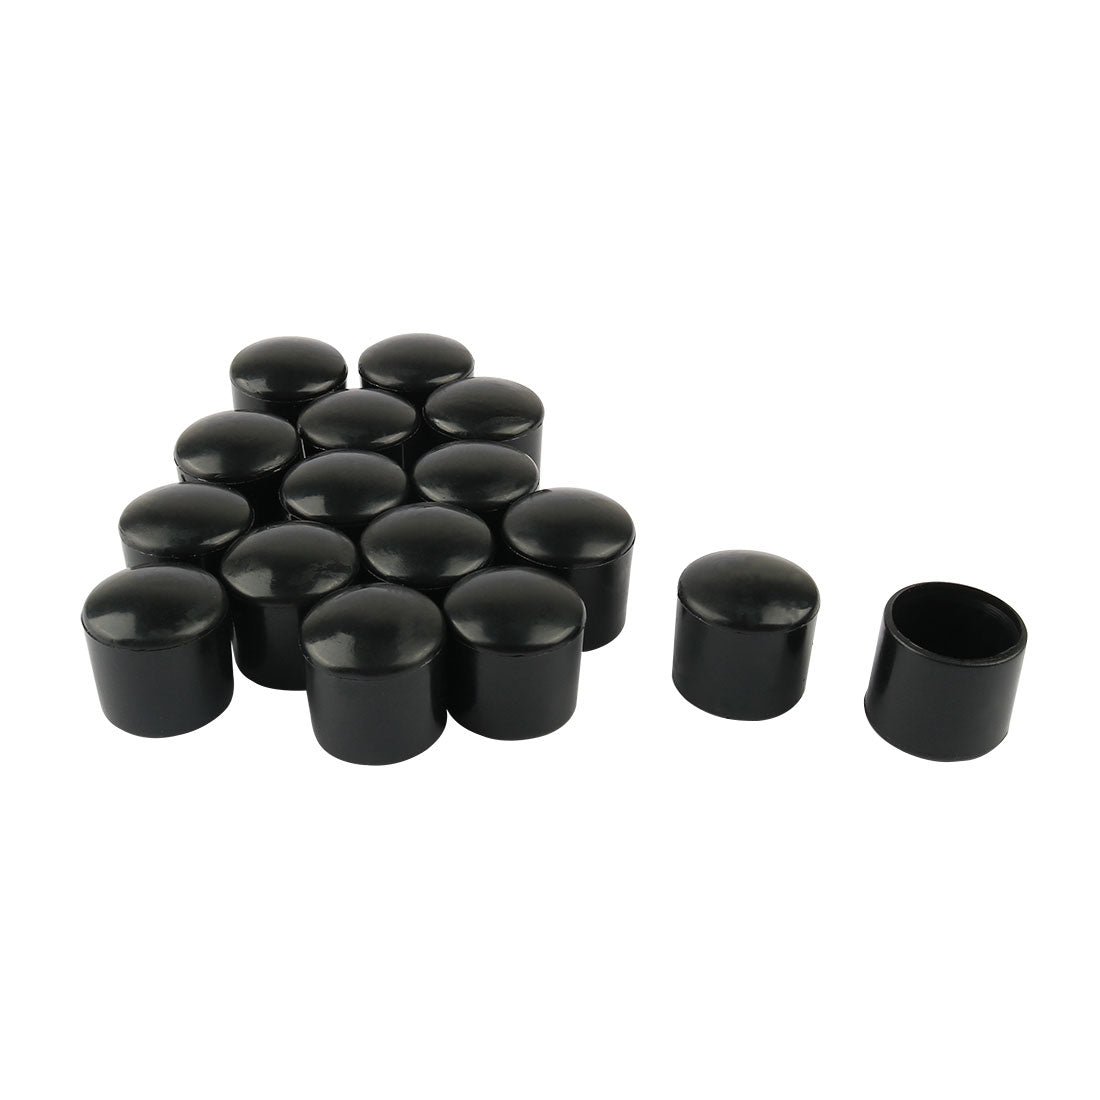 uxcell Uxcell PVC Leg Cap Tips Cup Feet Covers 16pcs Anti-moisture for Furniture Chair Benches